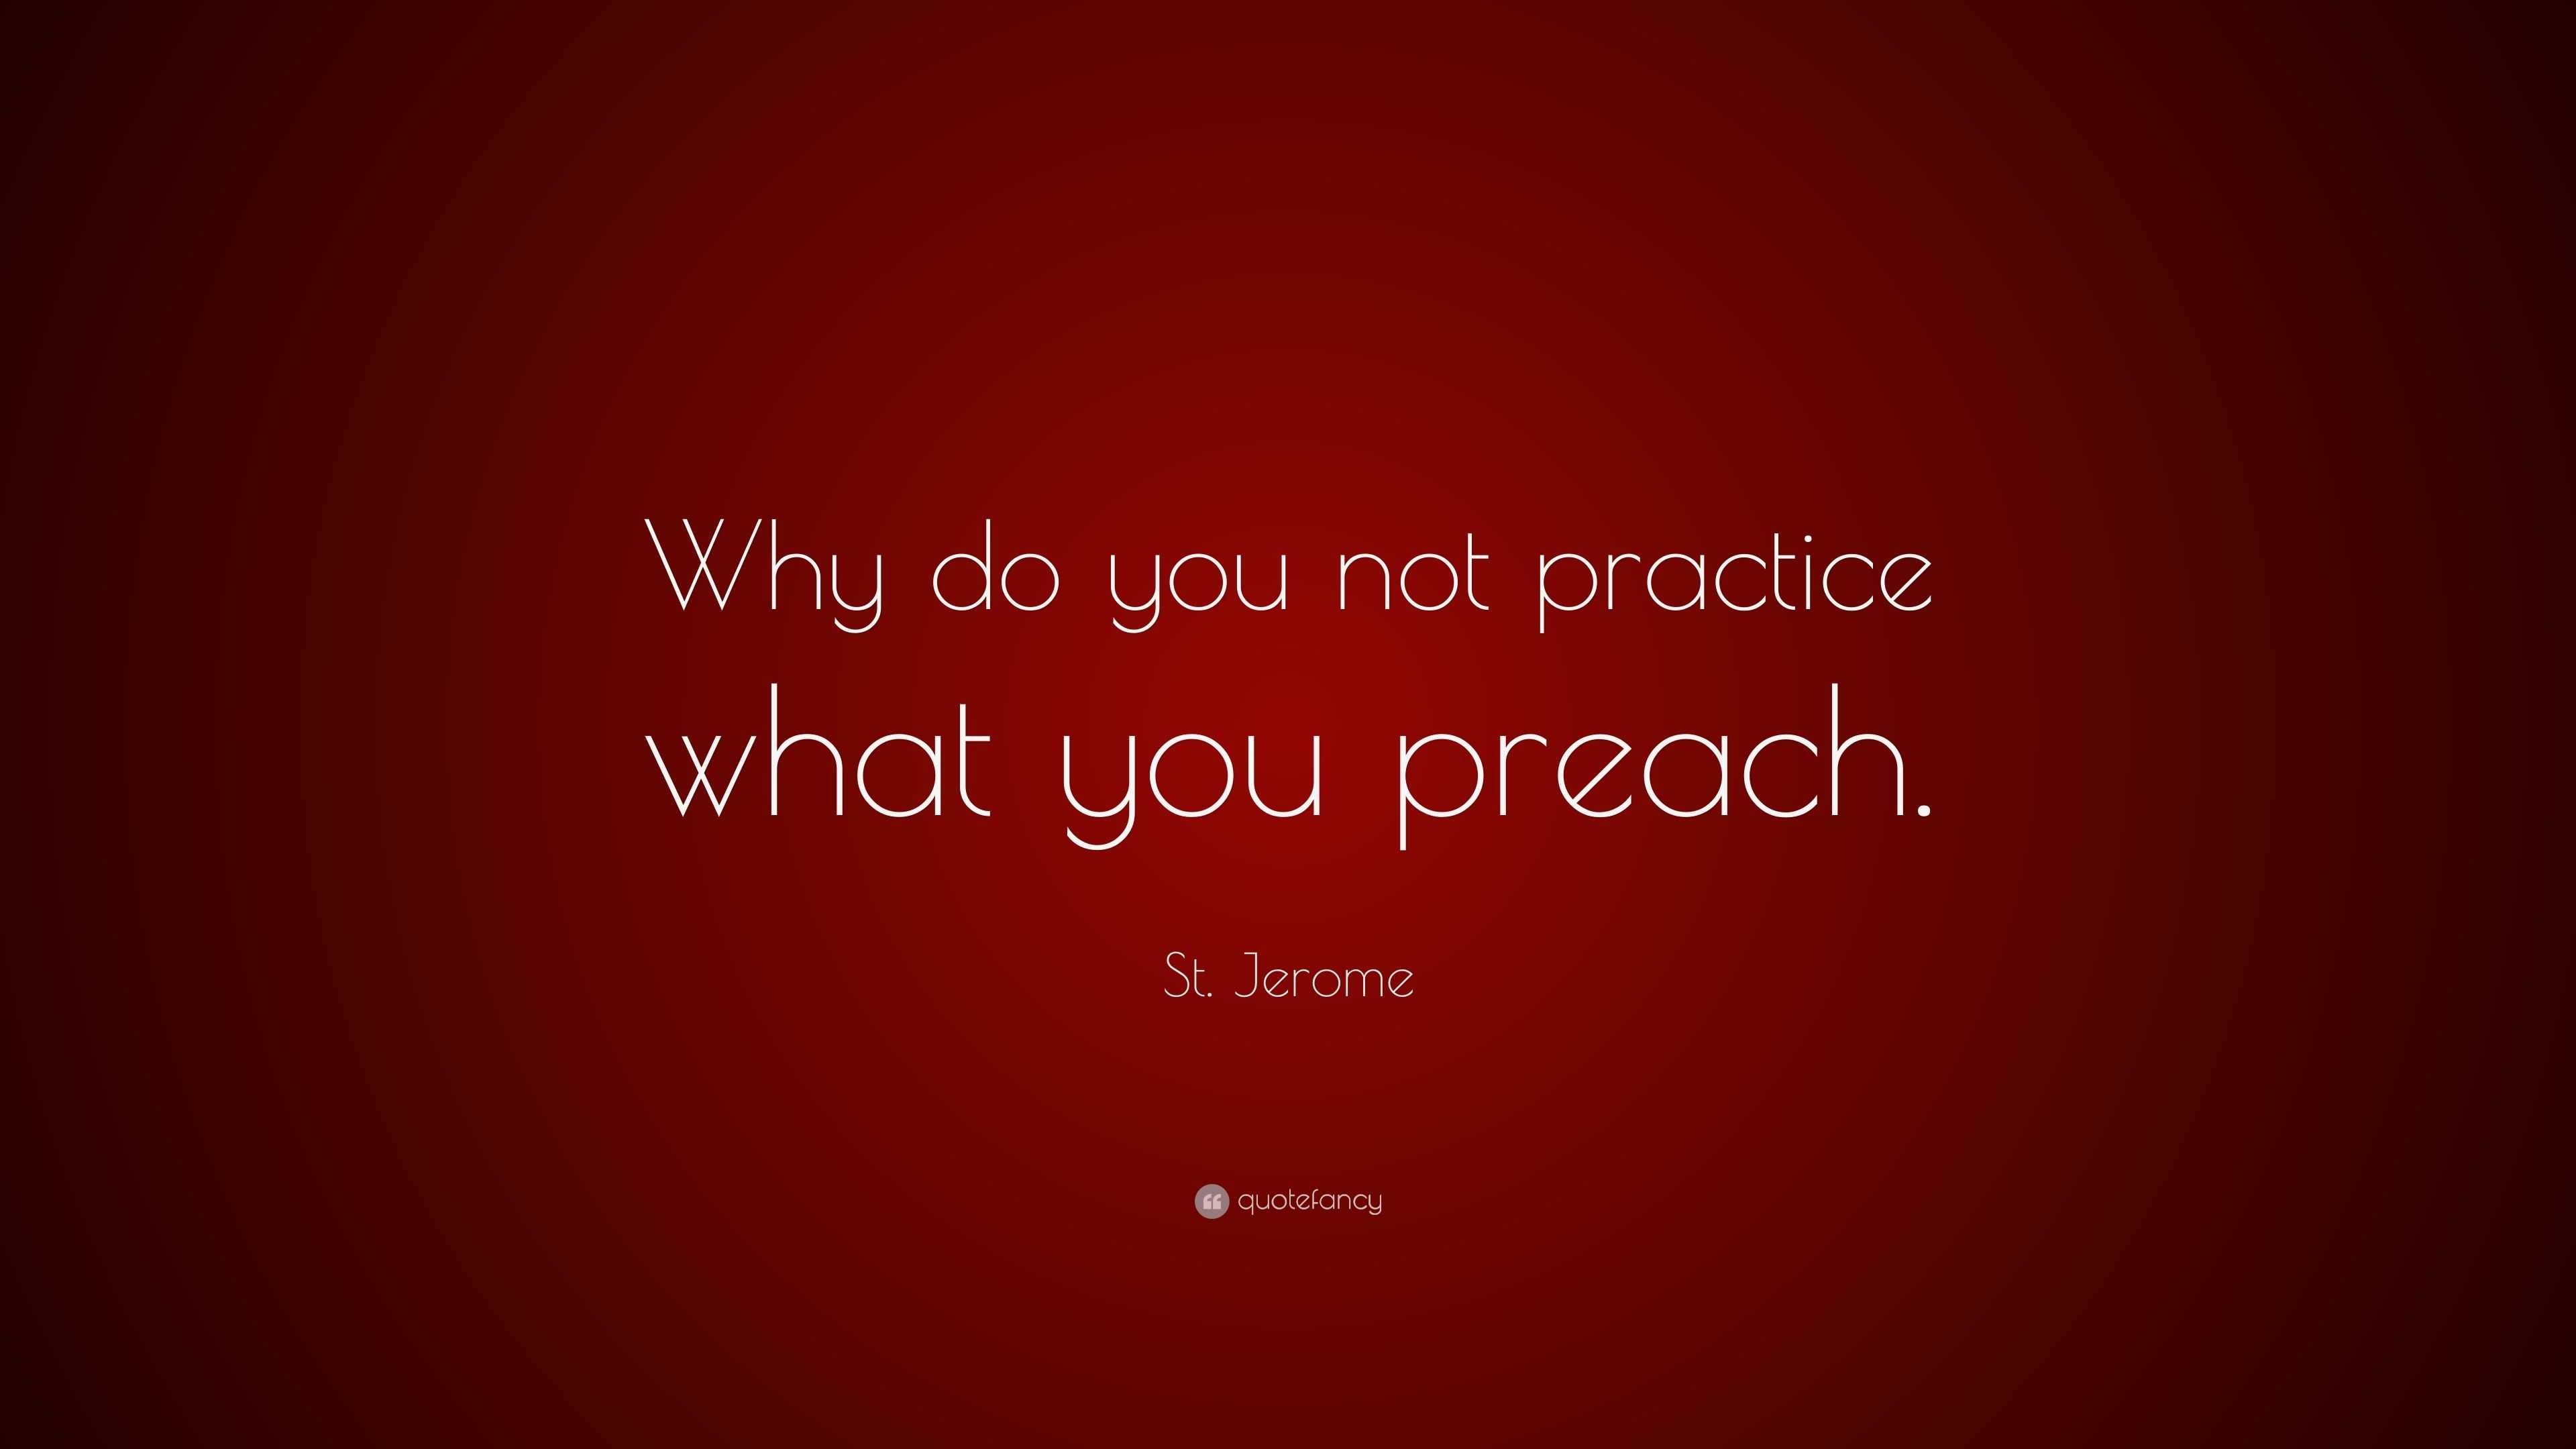 practice what you preach quotes